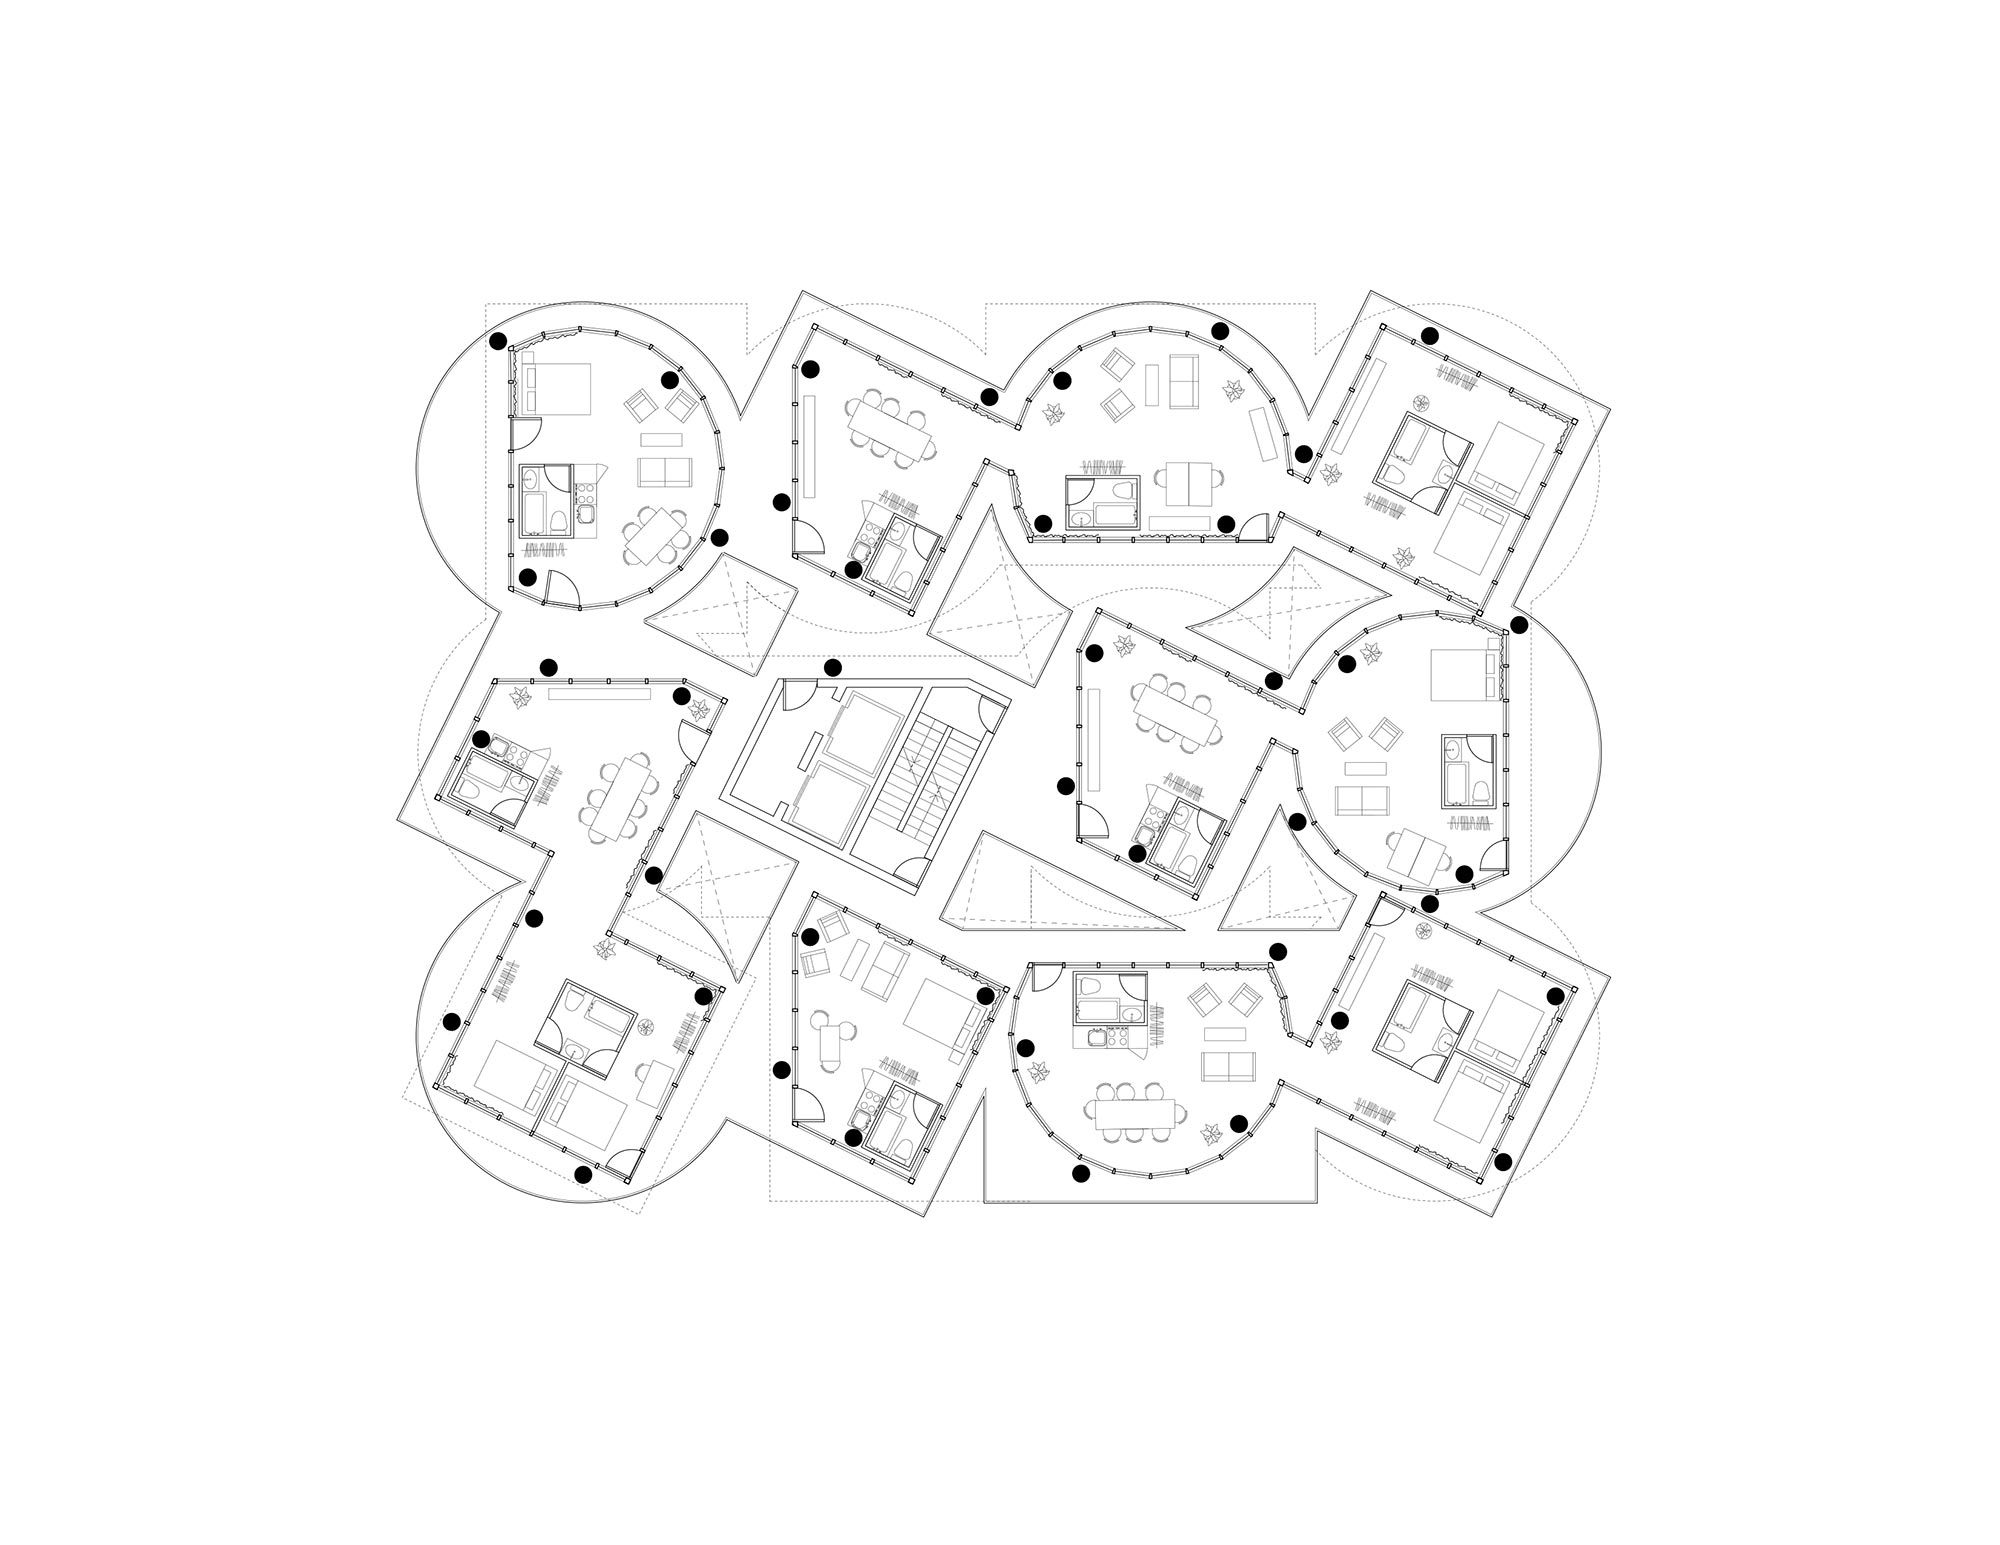 Plans - Table Top Apartments: New York Affordable Housing / Kwong Von Glinow